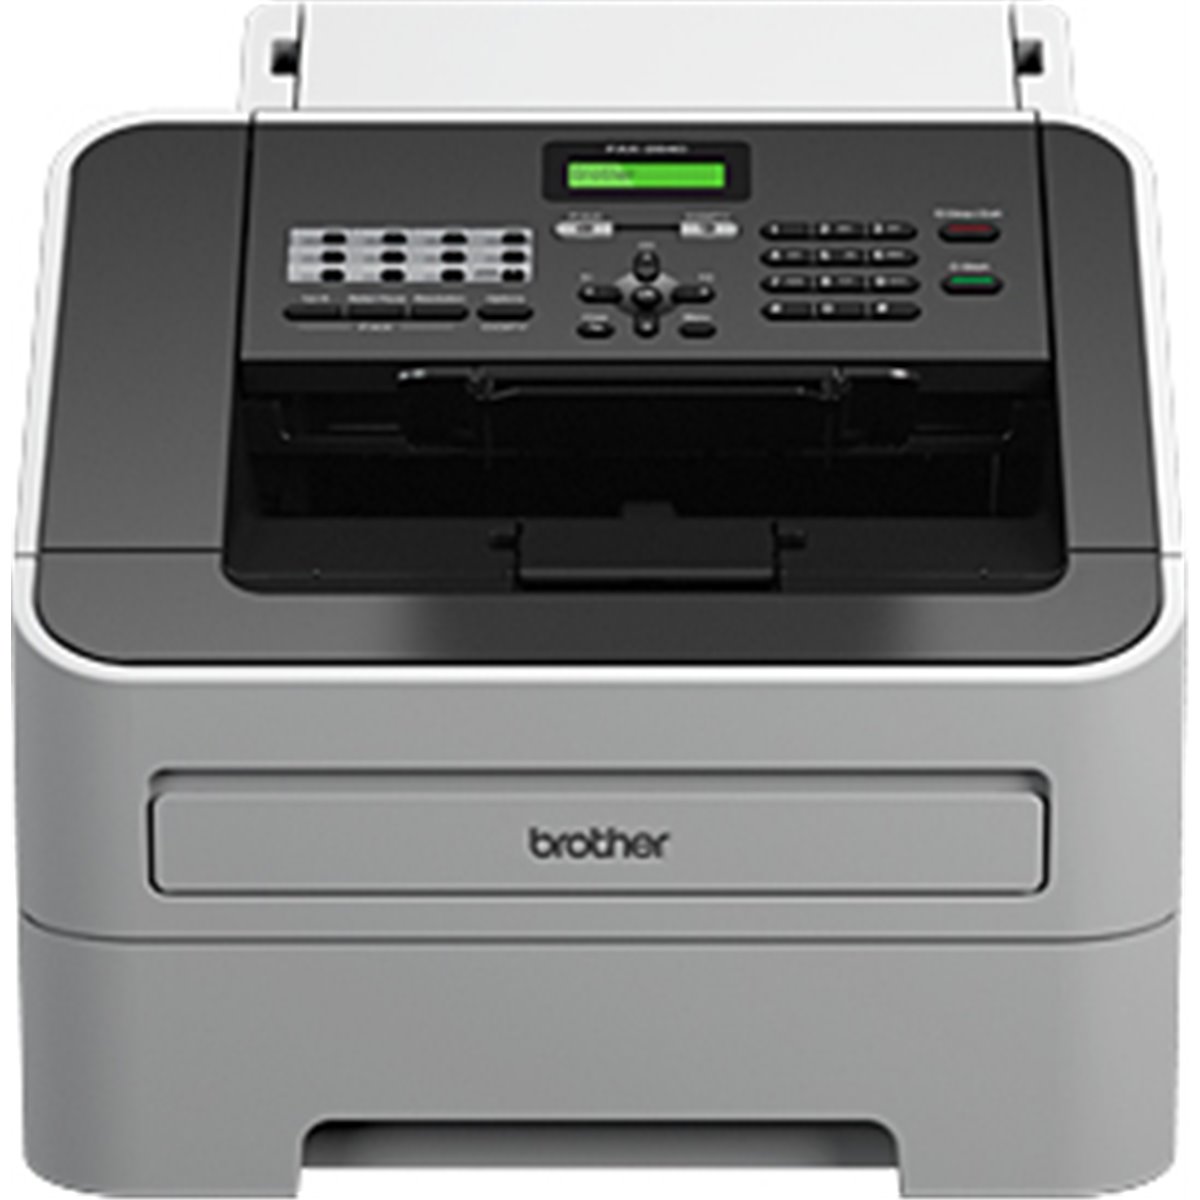 Brother Fax laser MONO 2940 - Fax - Laser/Led